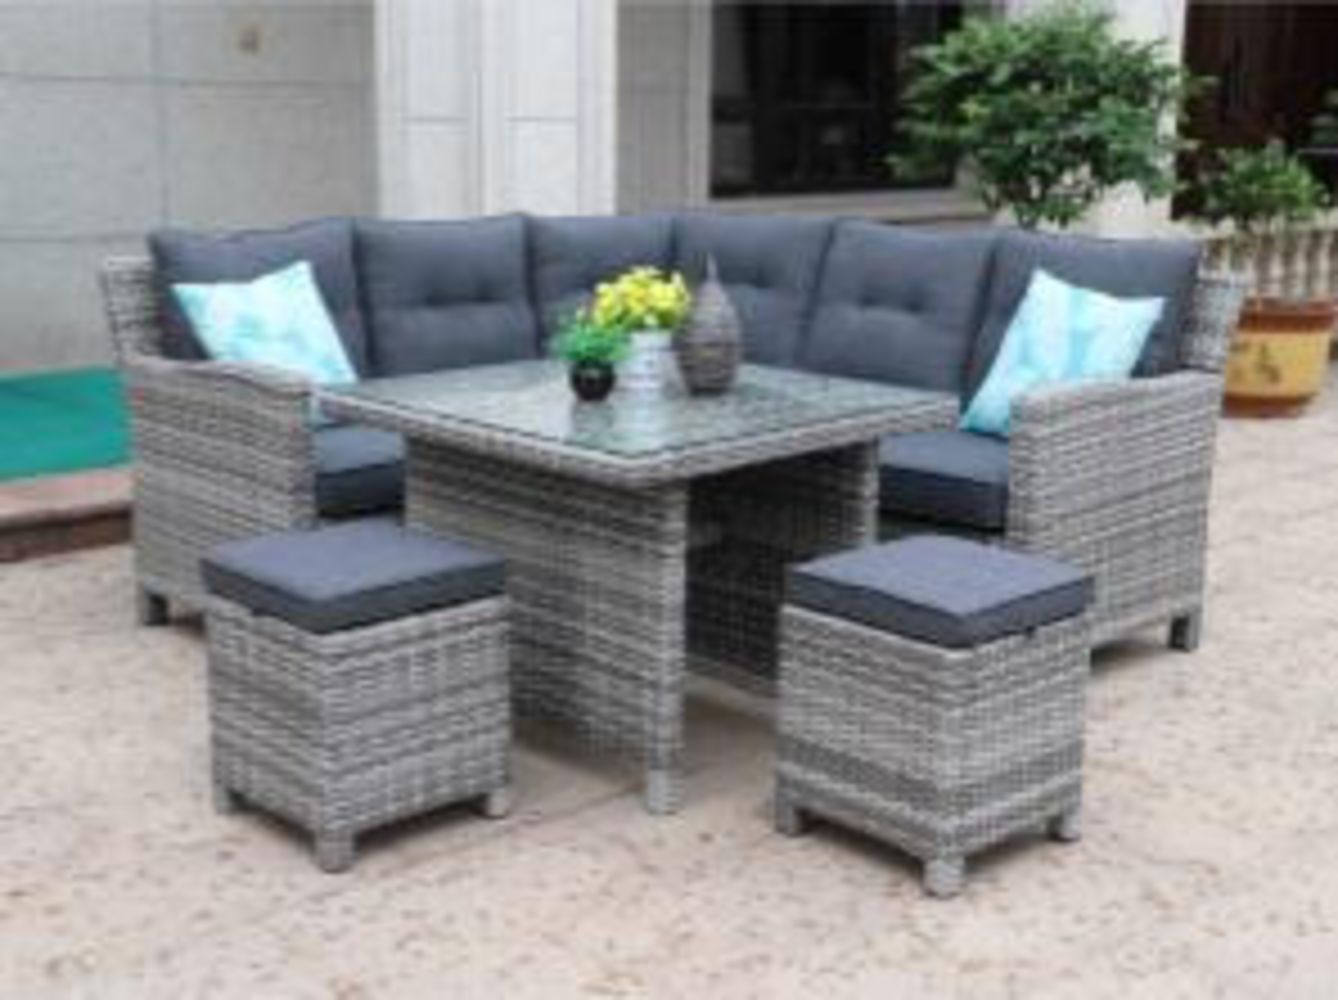 **New Lines Added** Brand New Rattan Garden Furniture: Including Dining Sets, Day Beds, Sofa Sets & Sun Loungers